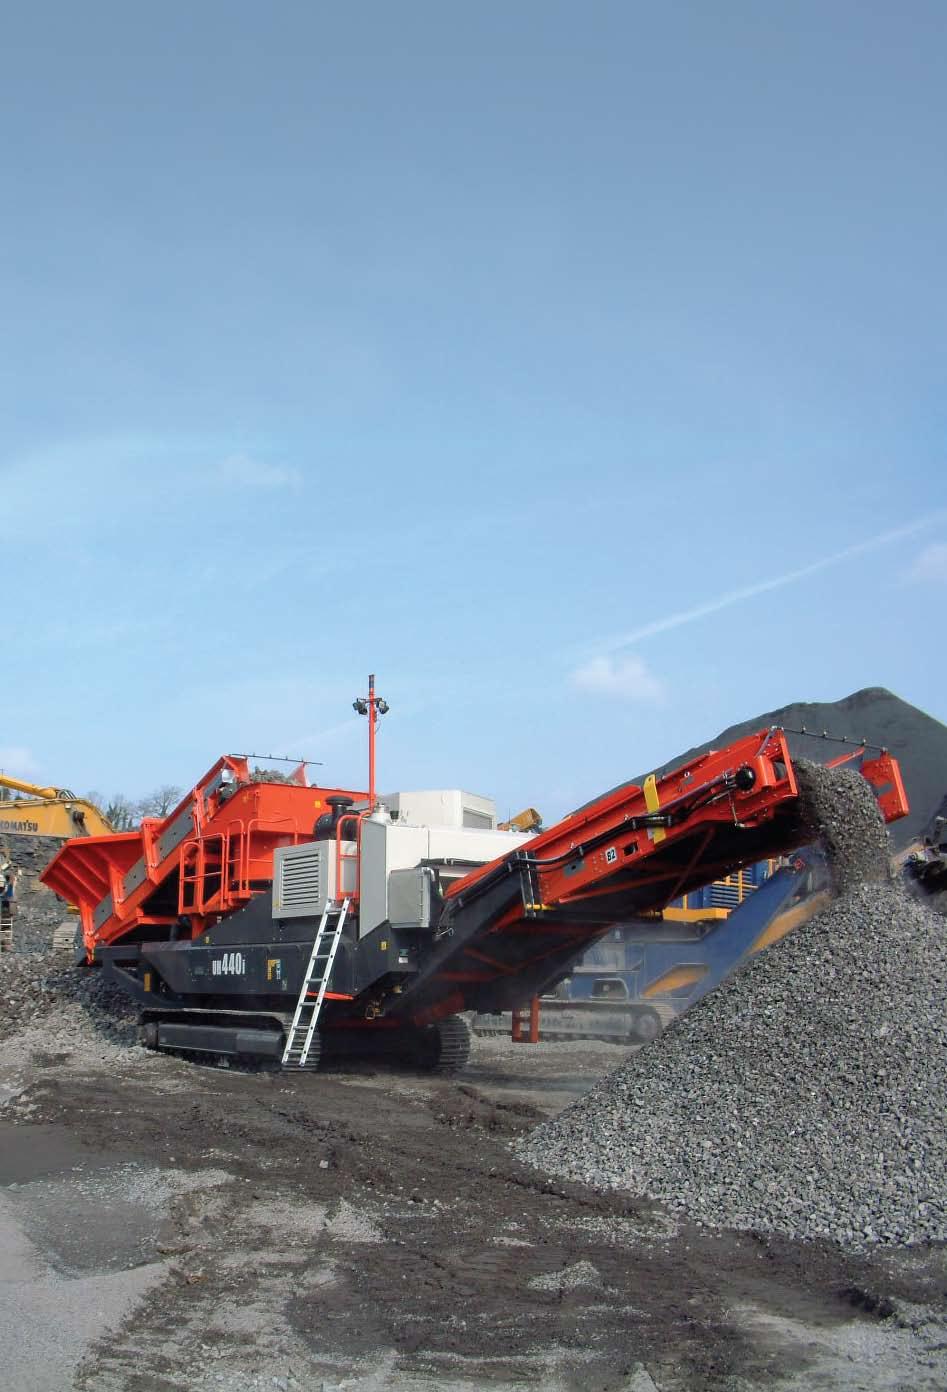 UH440i CONE CRUSHER UNIT UH440i Cone Crusher Unit The UH440i is a highly robust tracked cone crusher that has been designed to last as it is able to cope with the toughest and hardest types of rock,